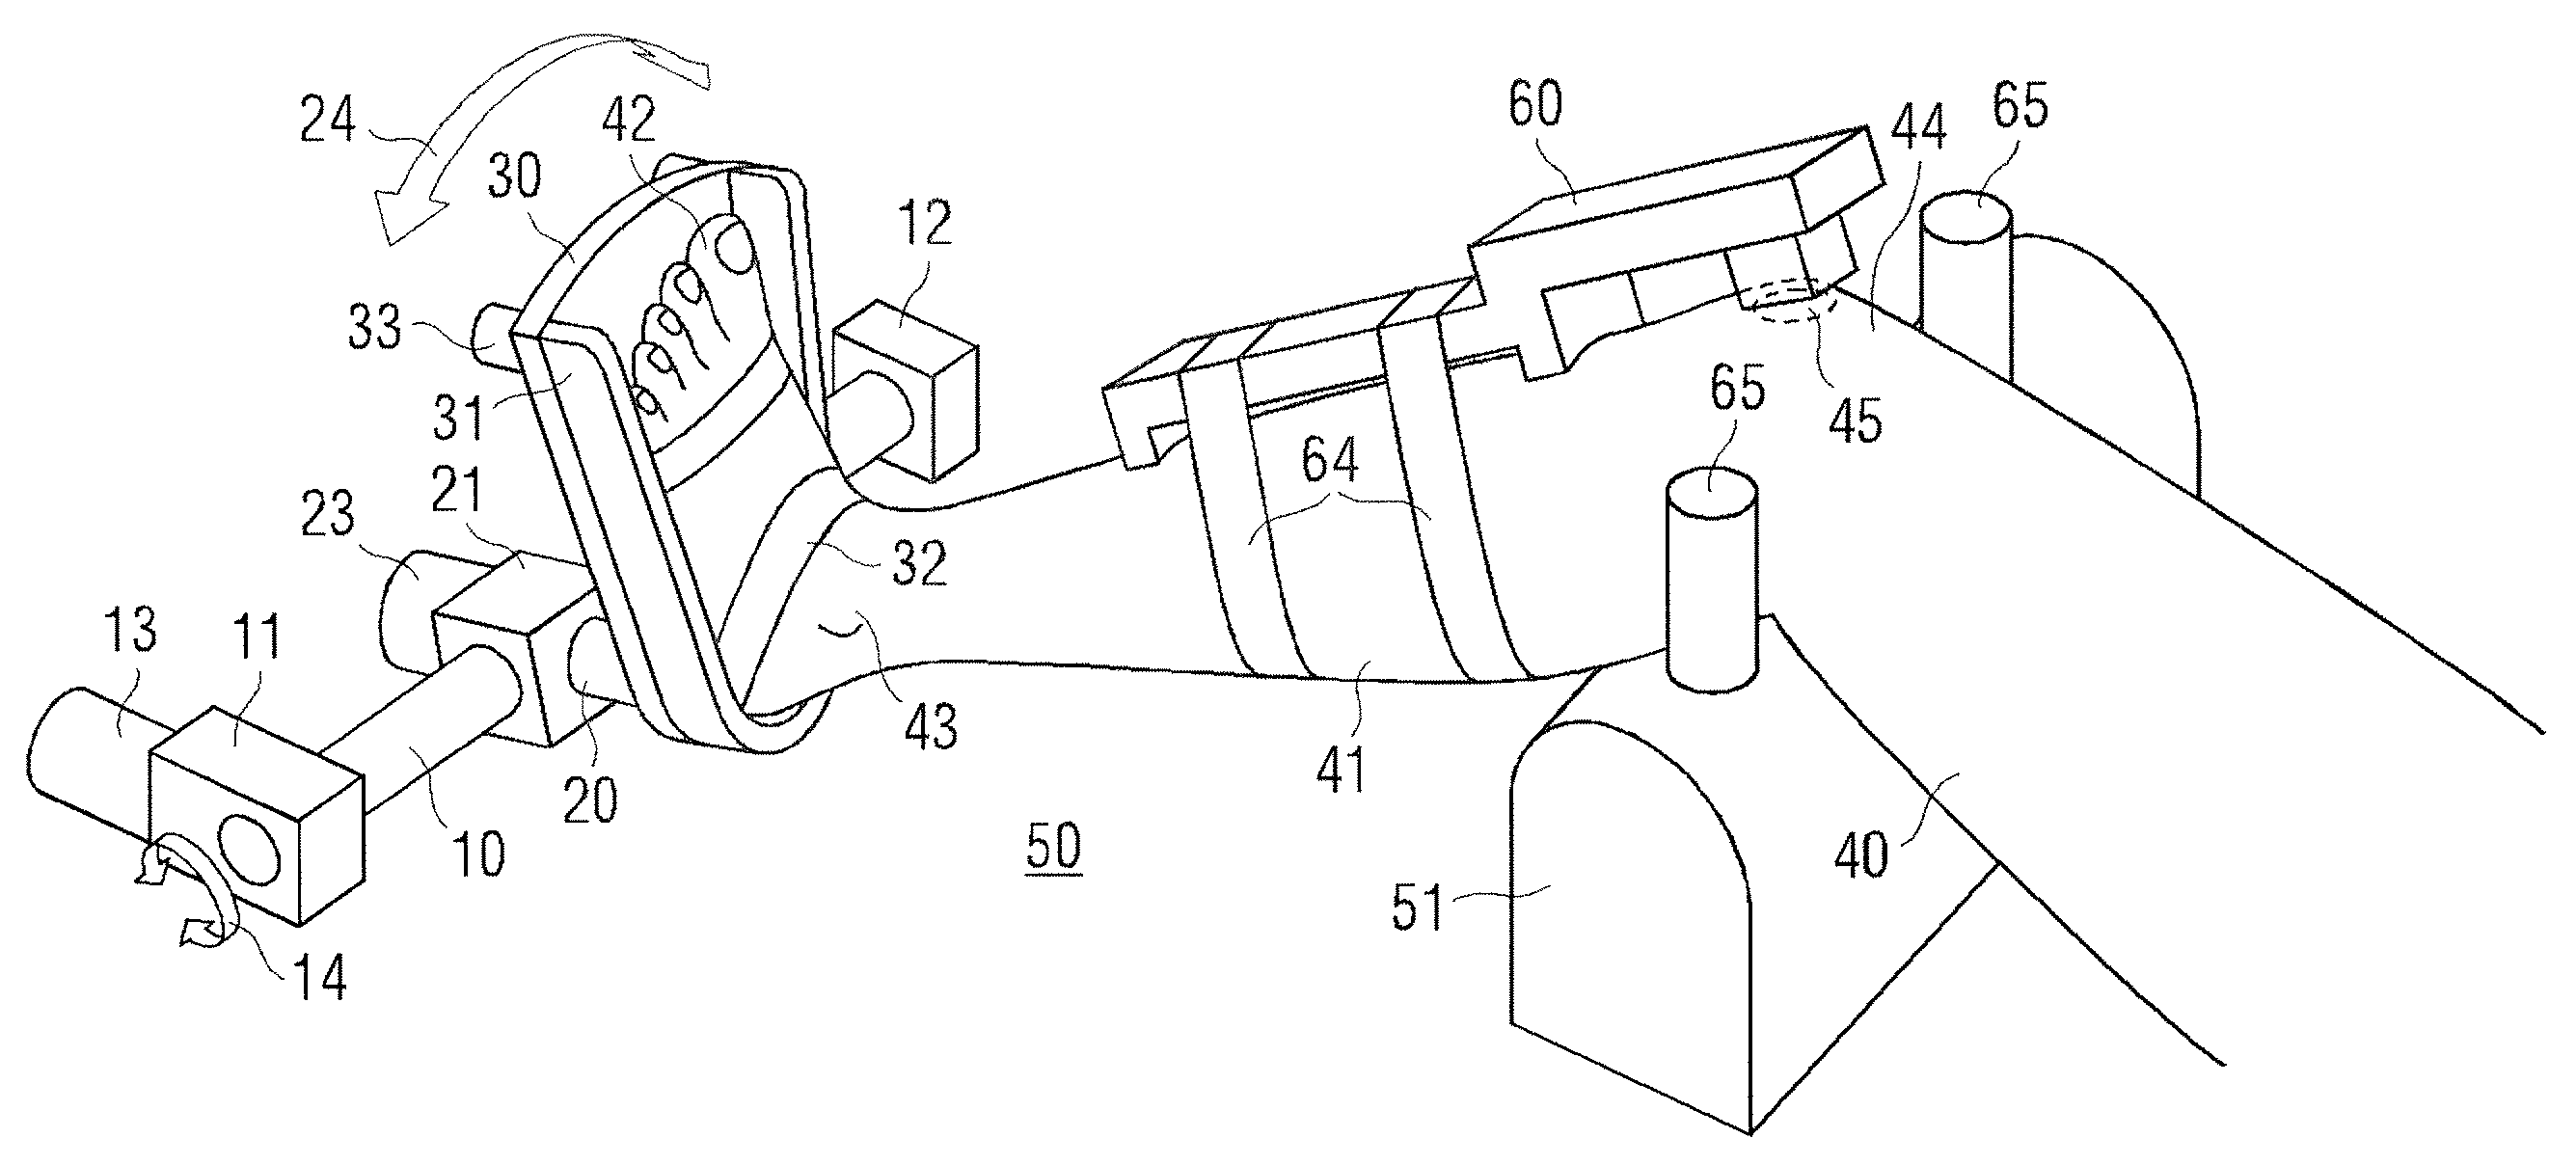 Device and method for knee ligament strain measurement